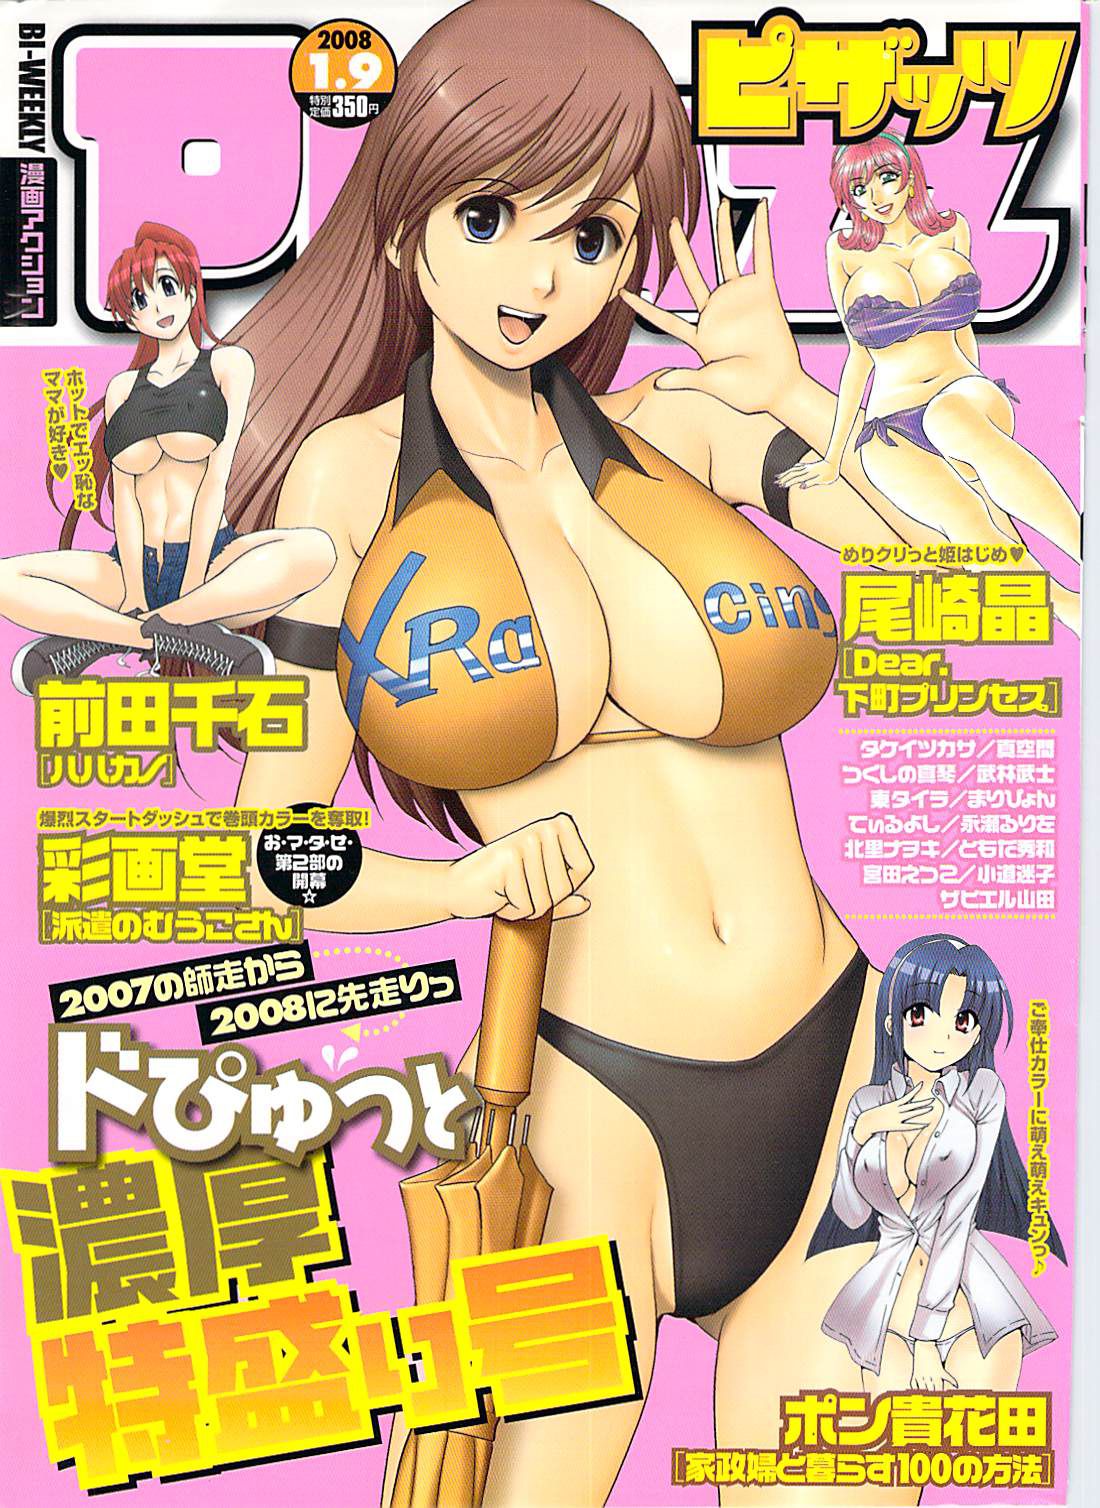 [Saigado] Cover Illustrations [彩画堂] Cover Illustrations 122